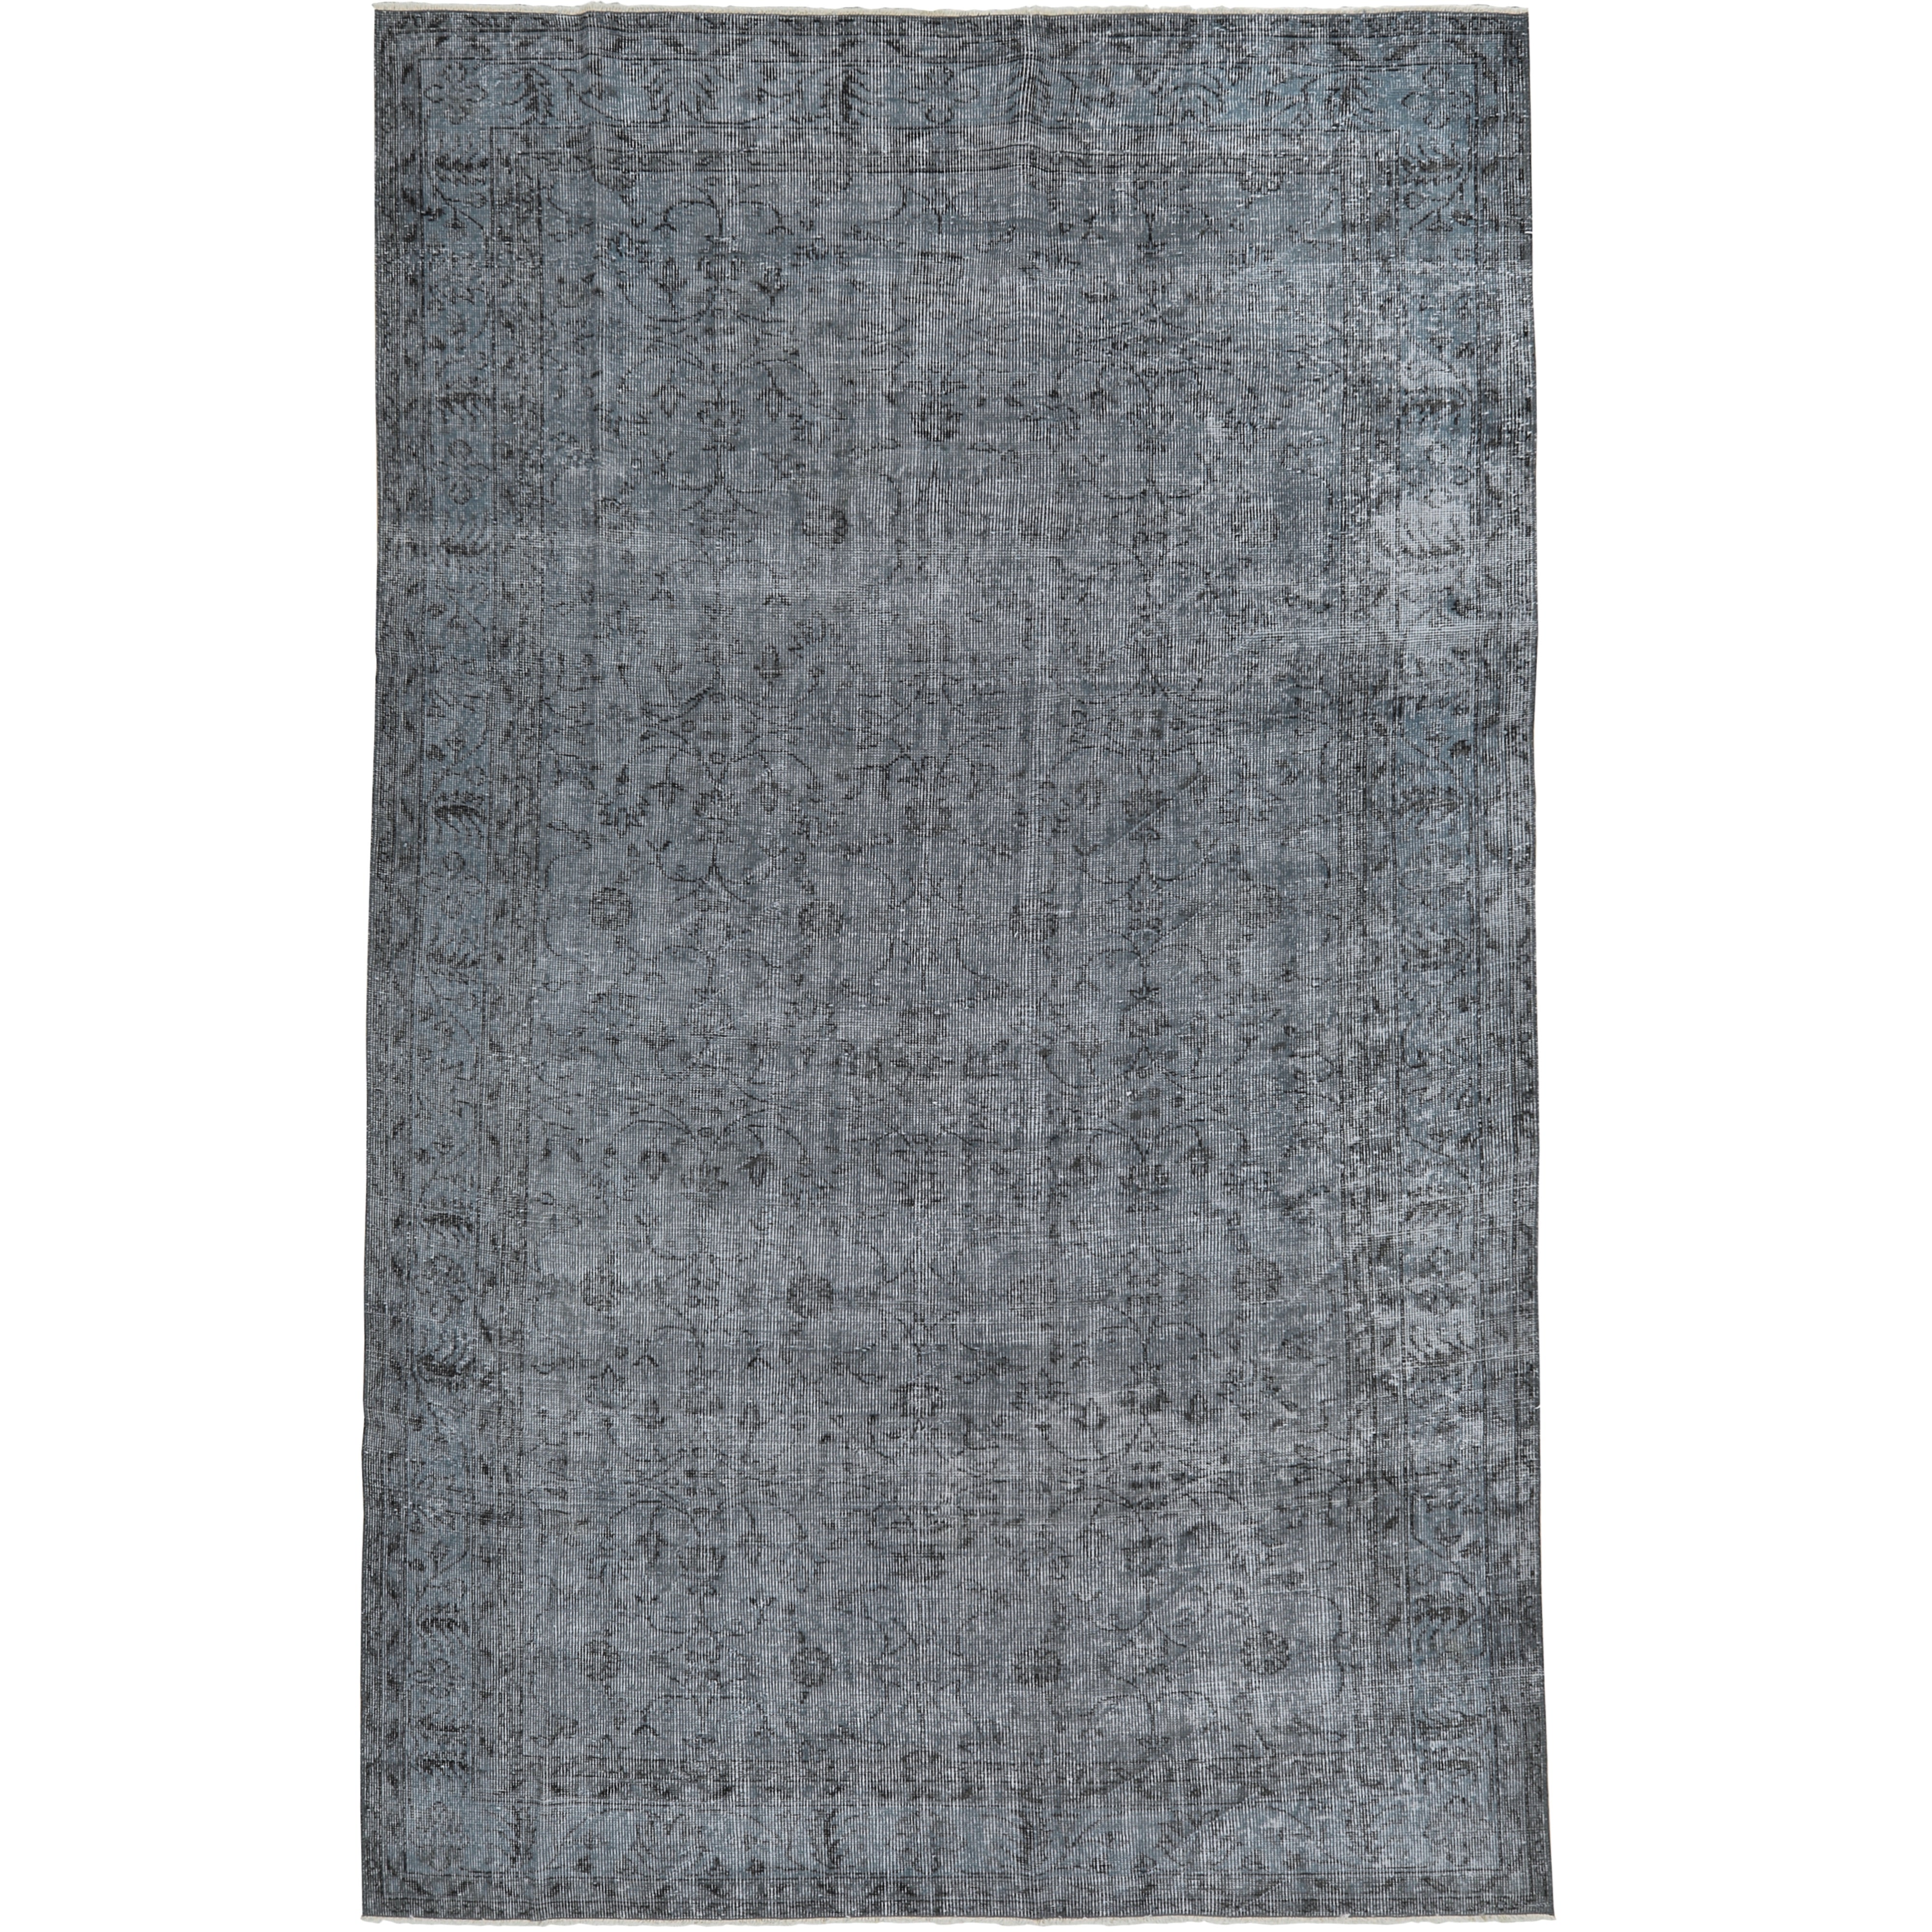 Emersyn - A Vision in Blue | Kuden Rugs